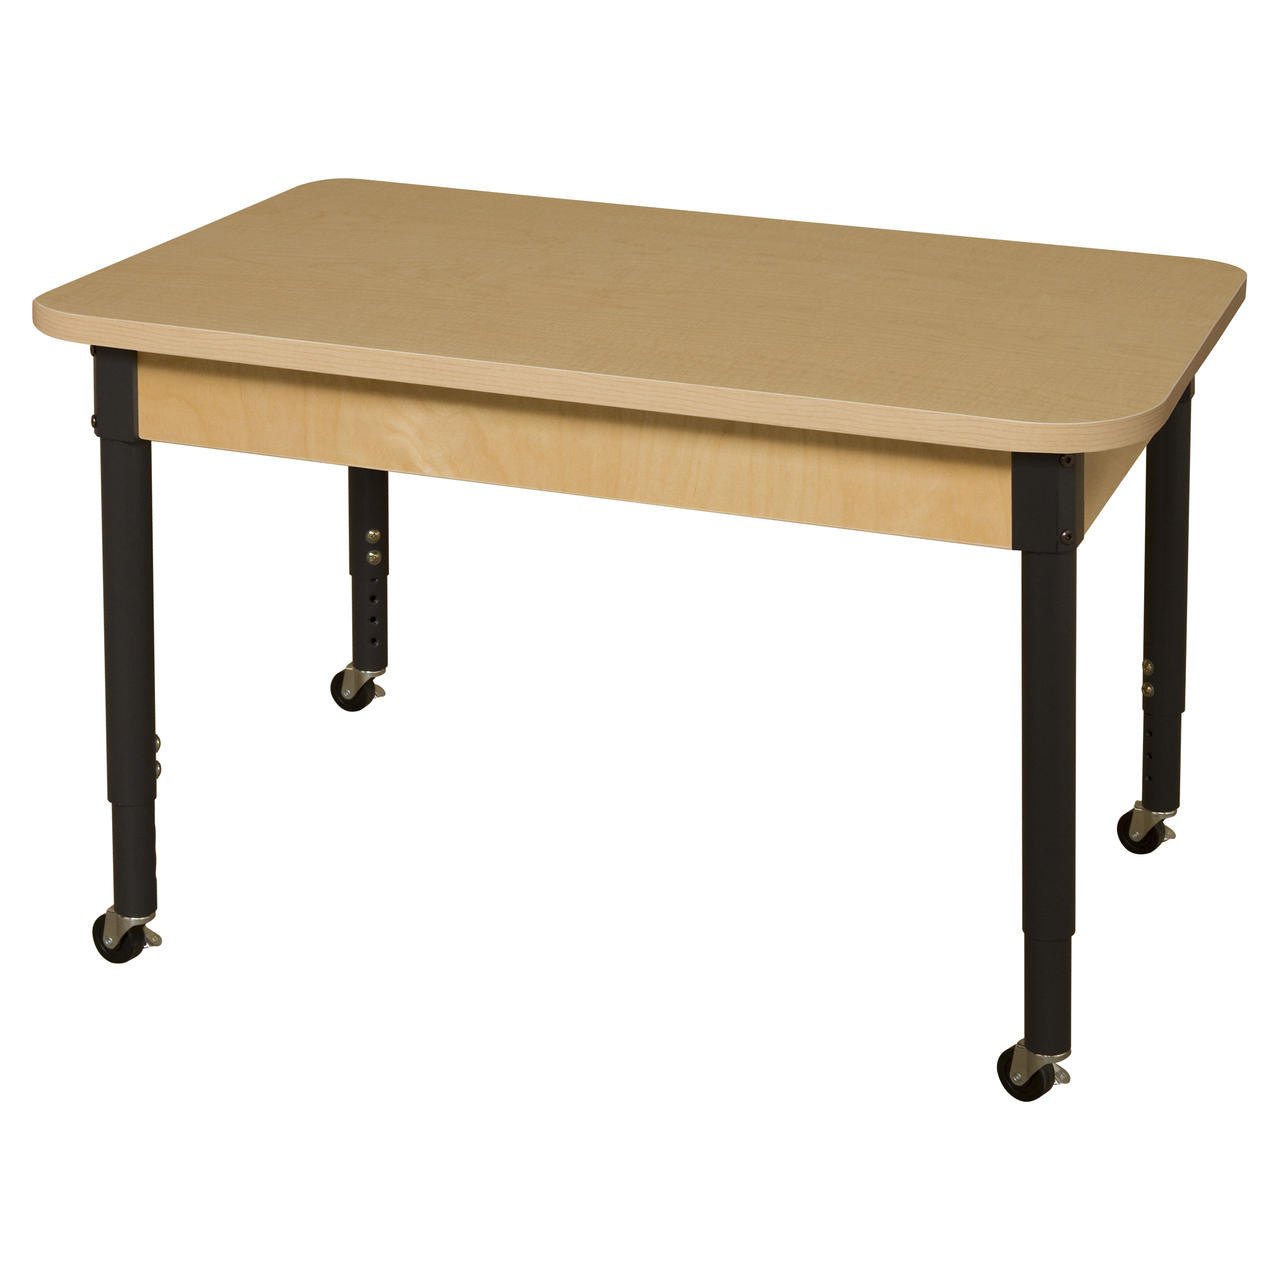 Mobile Rectangle High Pressure Laminate Table with Adjustable Legs 19"-30"